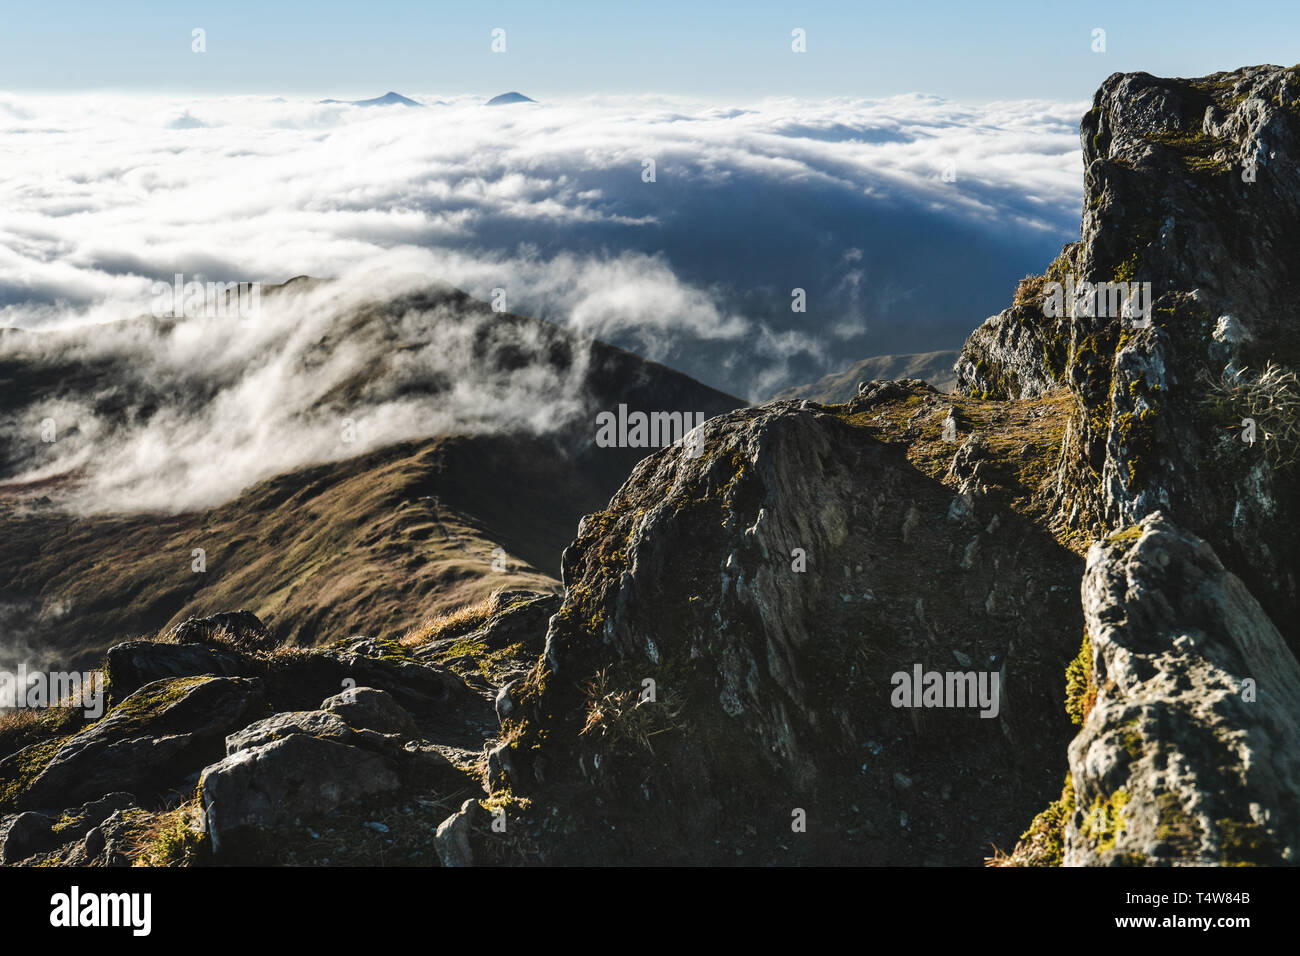 Sea of clouds below summits of mountains Stock Photo